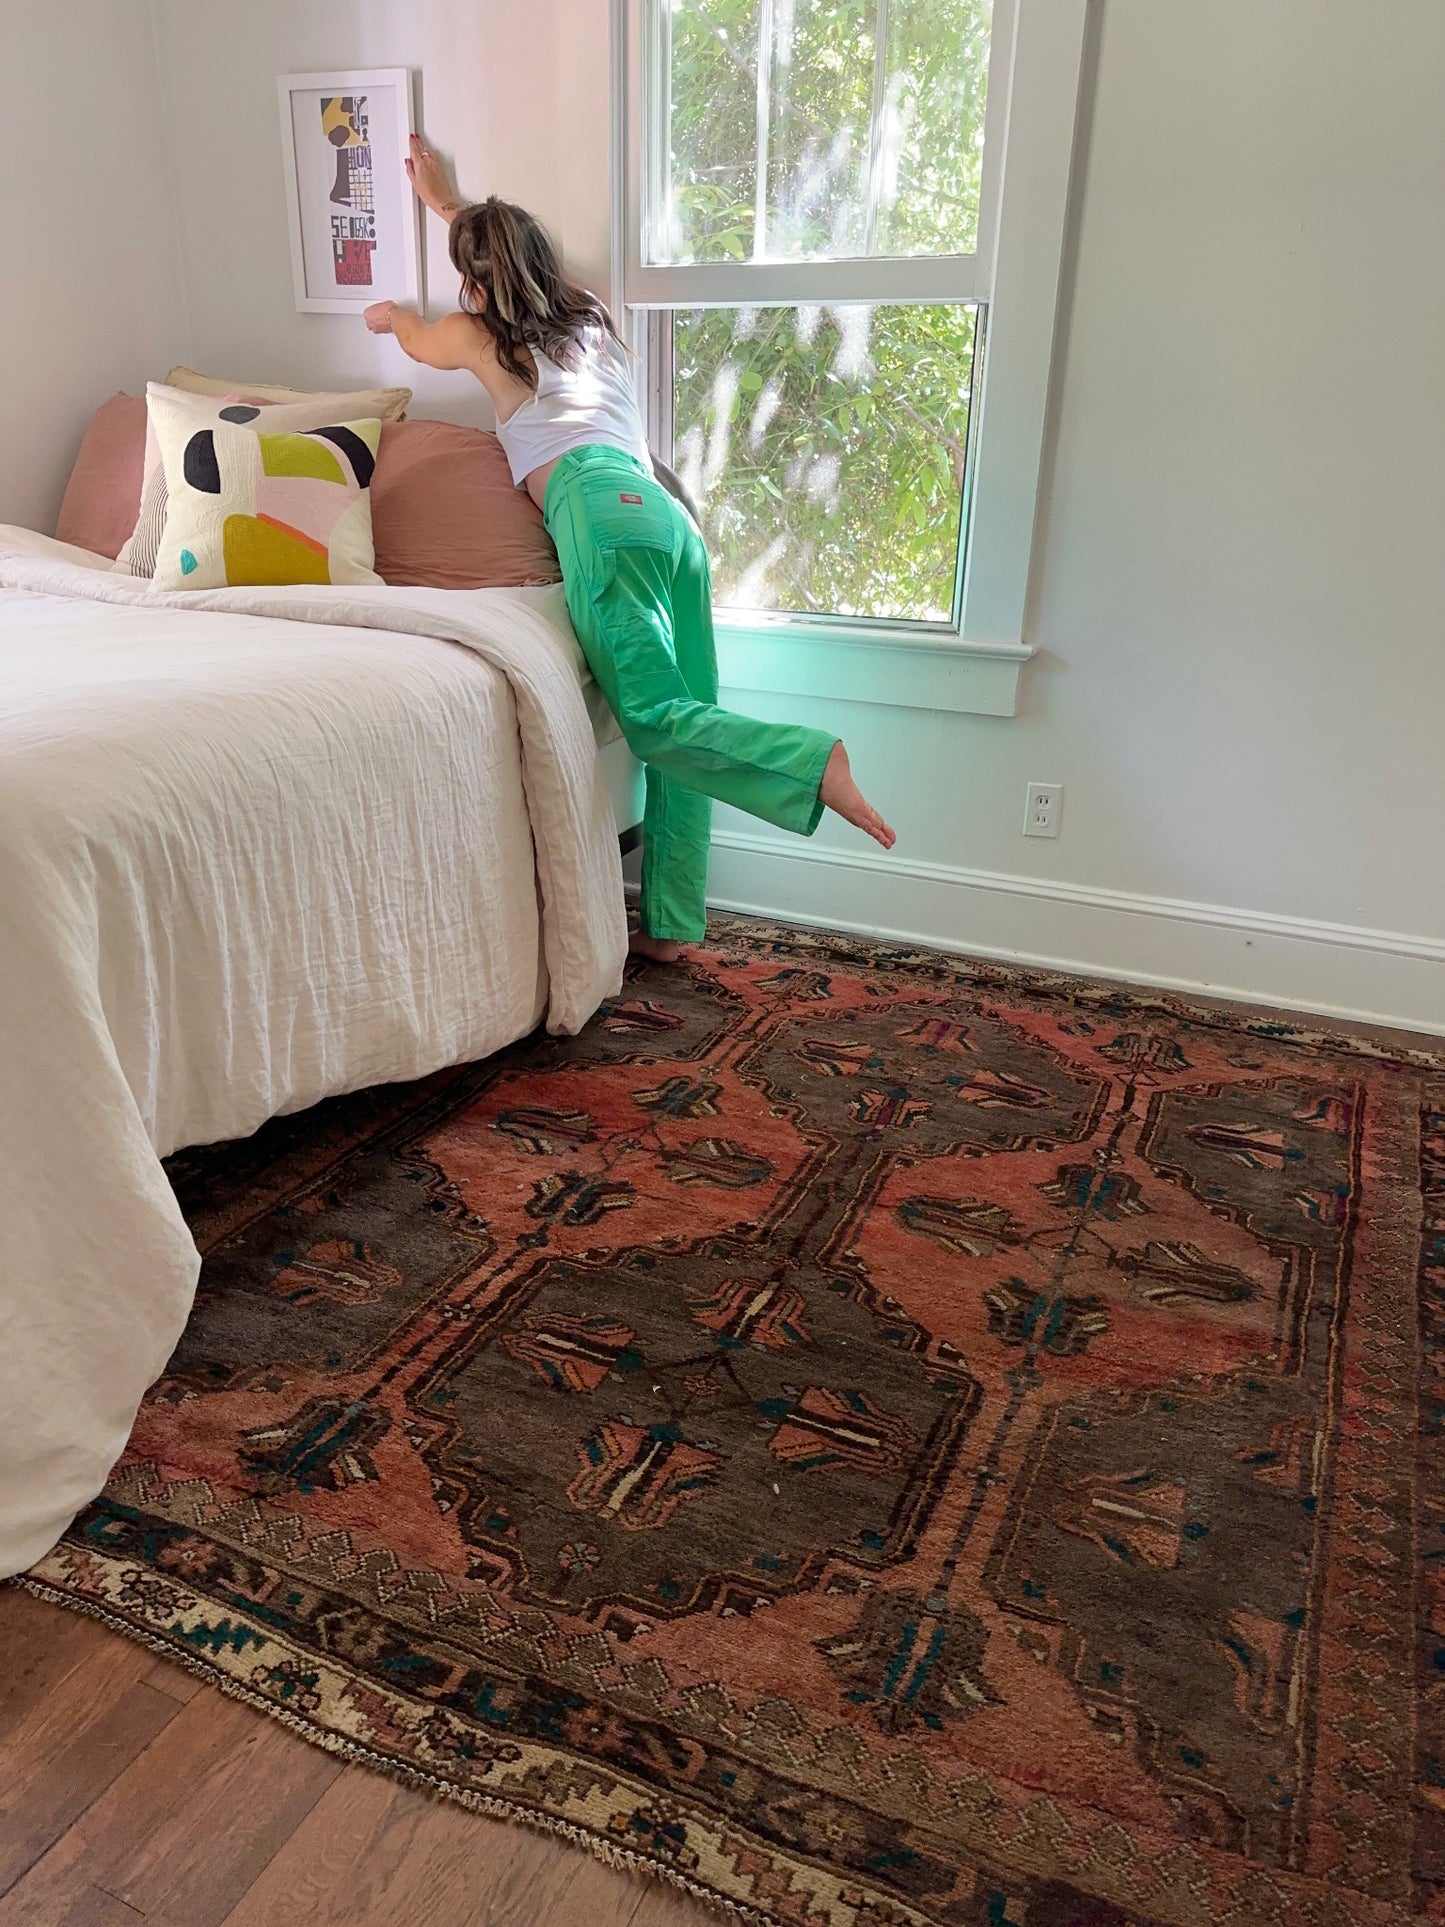 Copper Persian rug is so soft underfoot in a bright bedroom | Lost Hunt Vintage